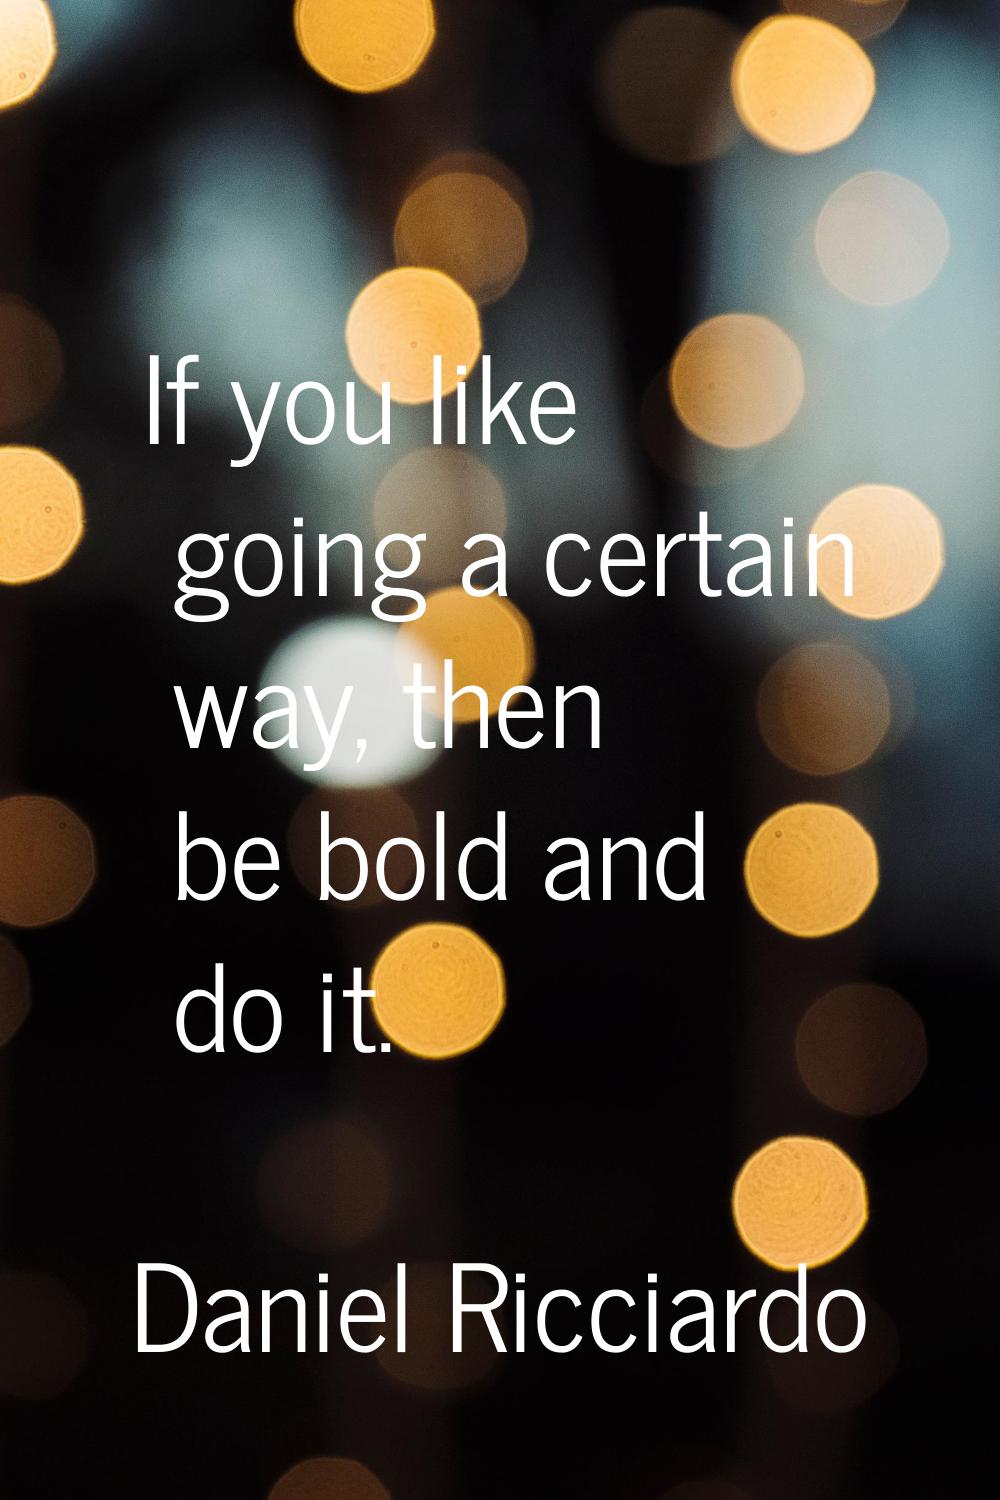 If you like going a certain way, then be bold and do it.